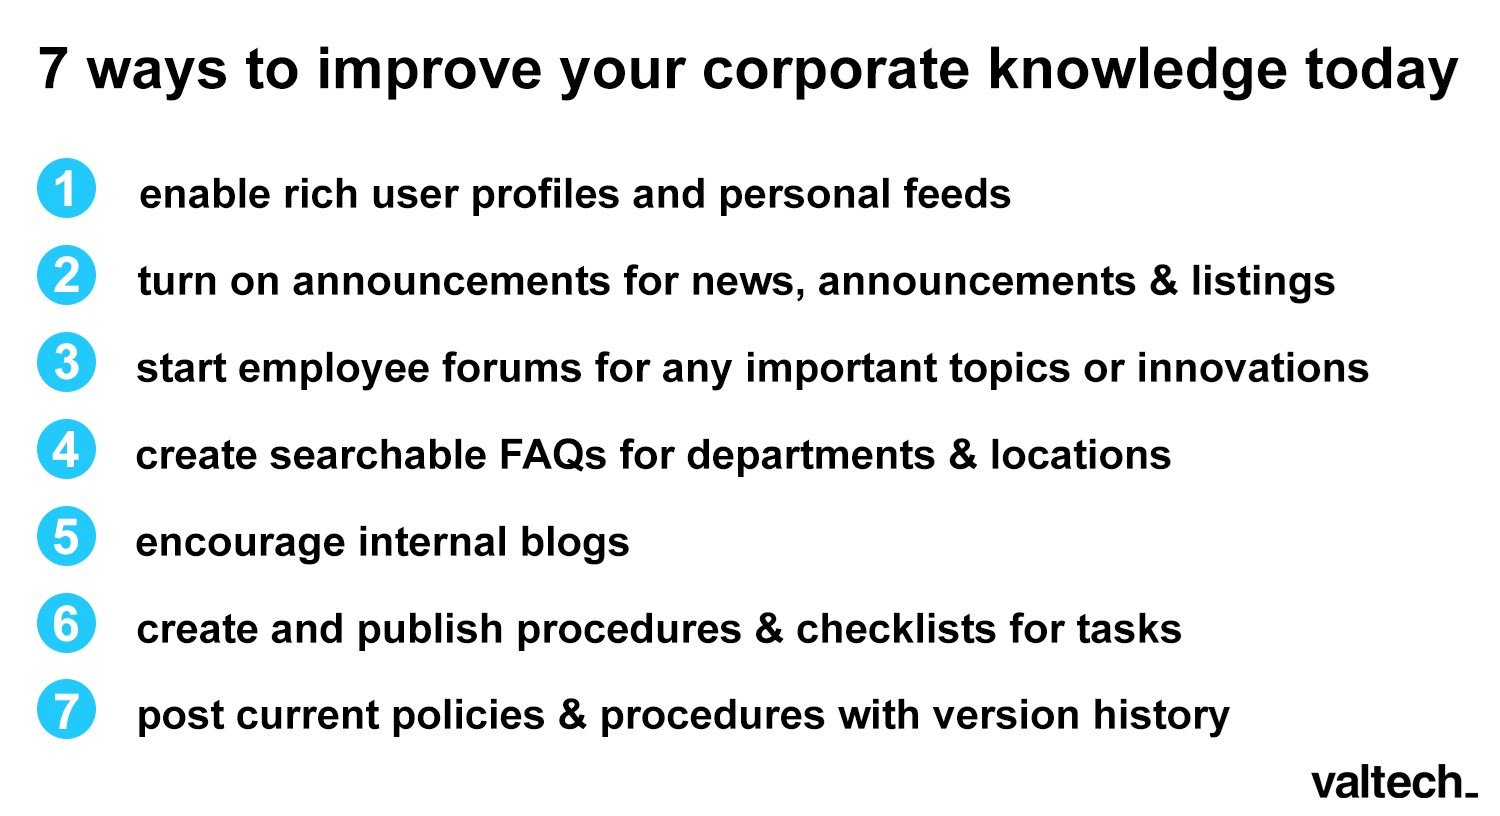 7-ways-to-improve-your-corporate-knowledge-today.jpg